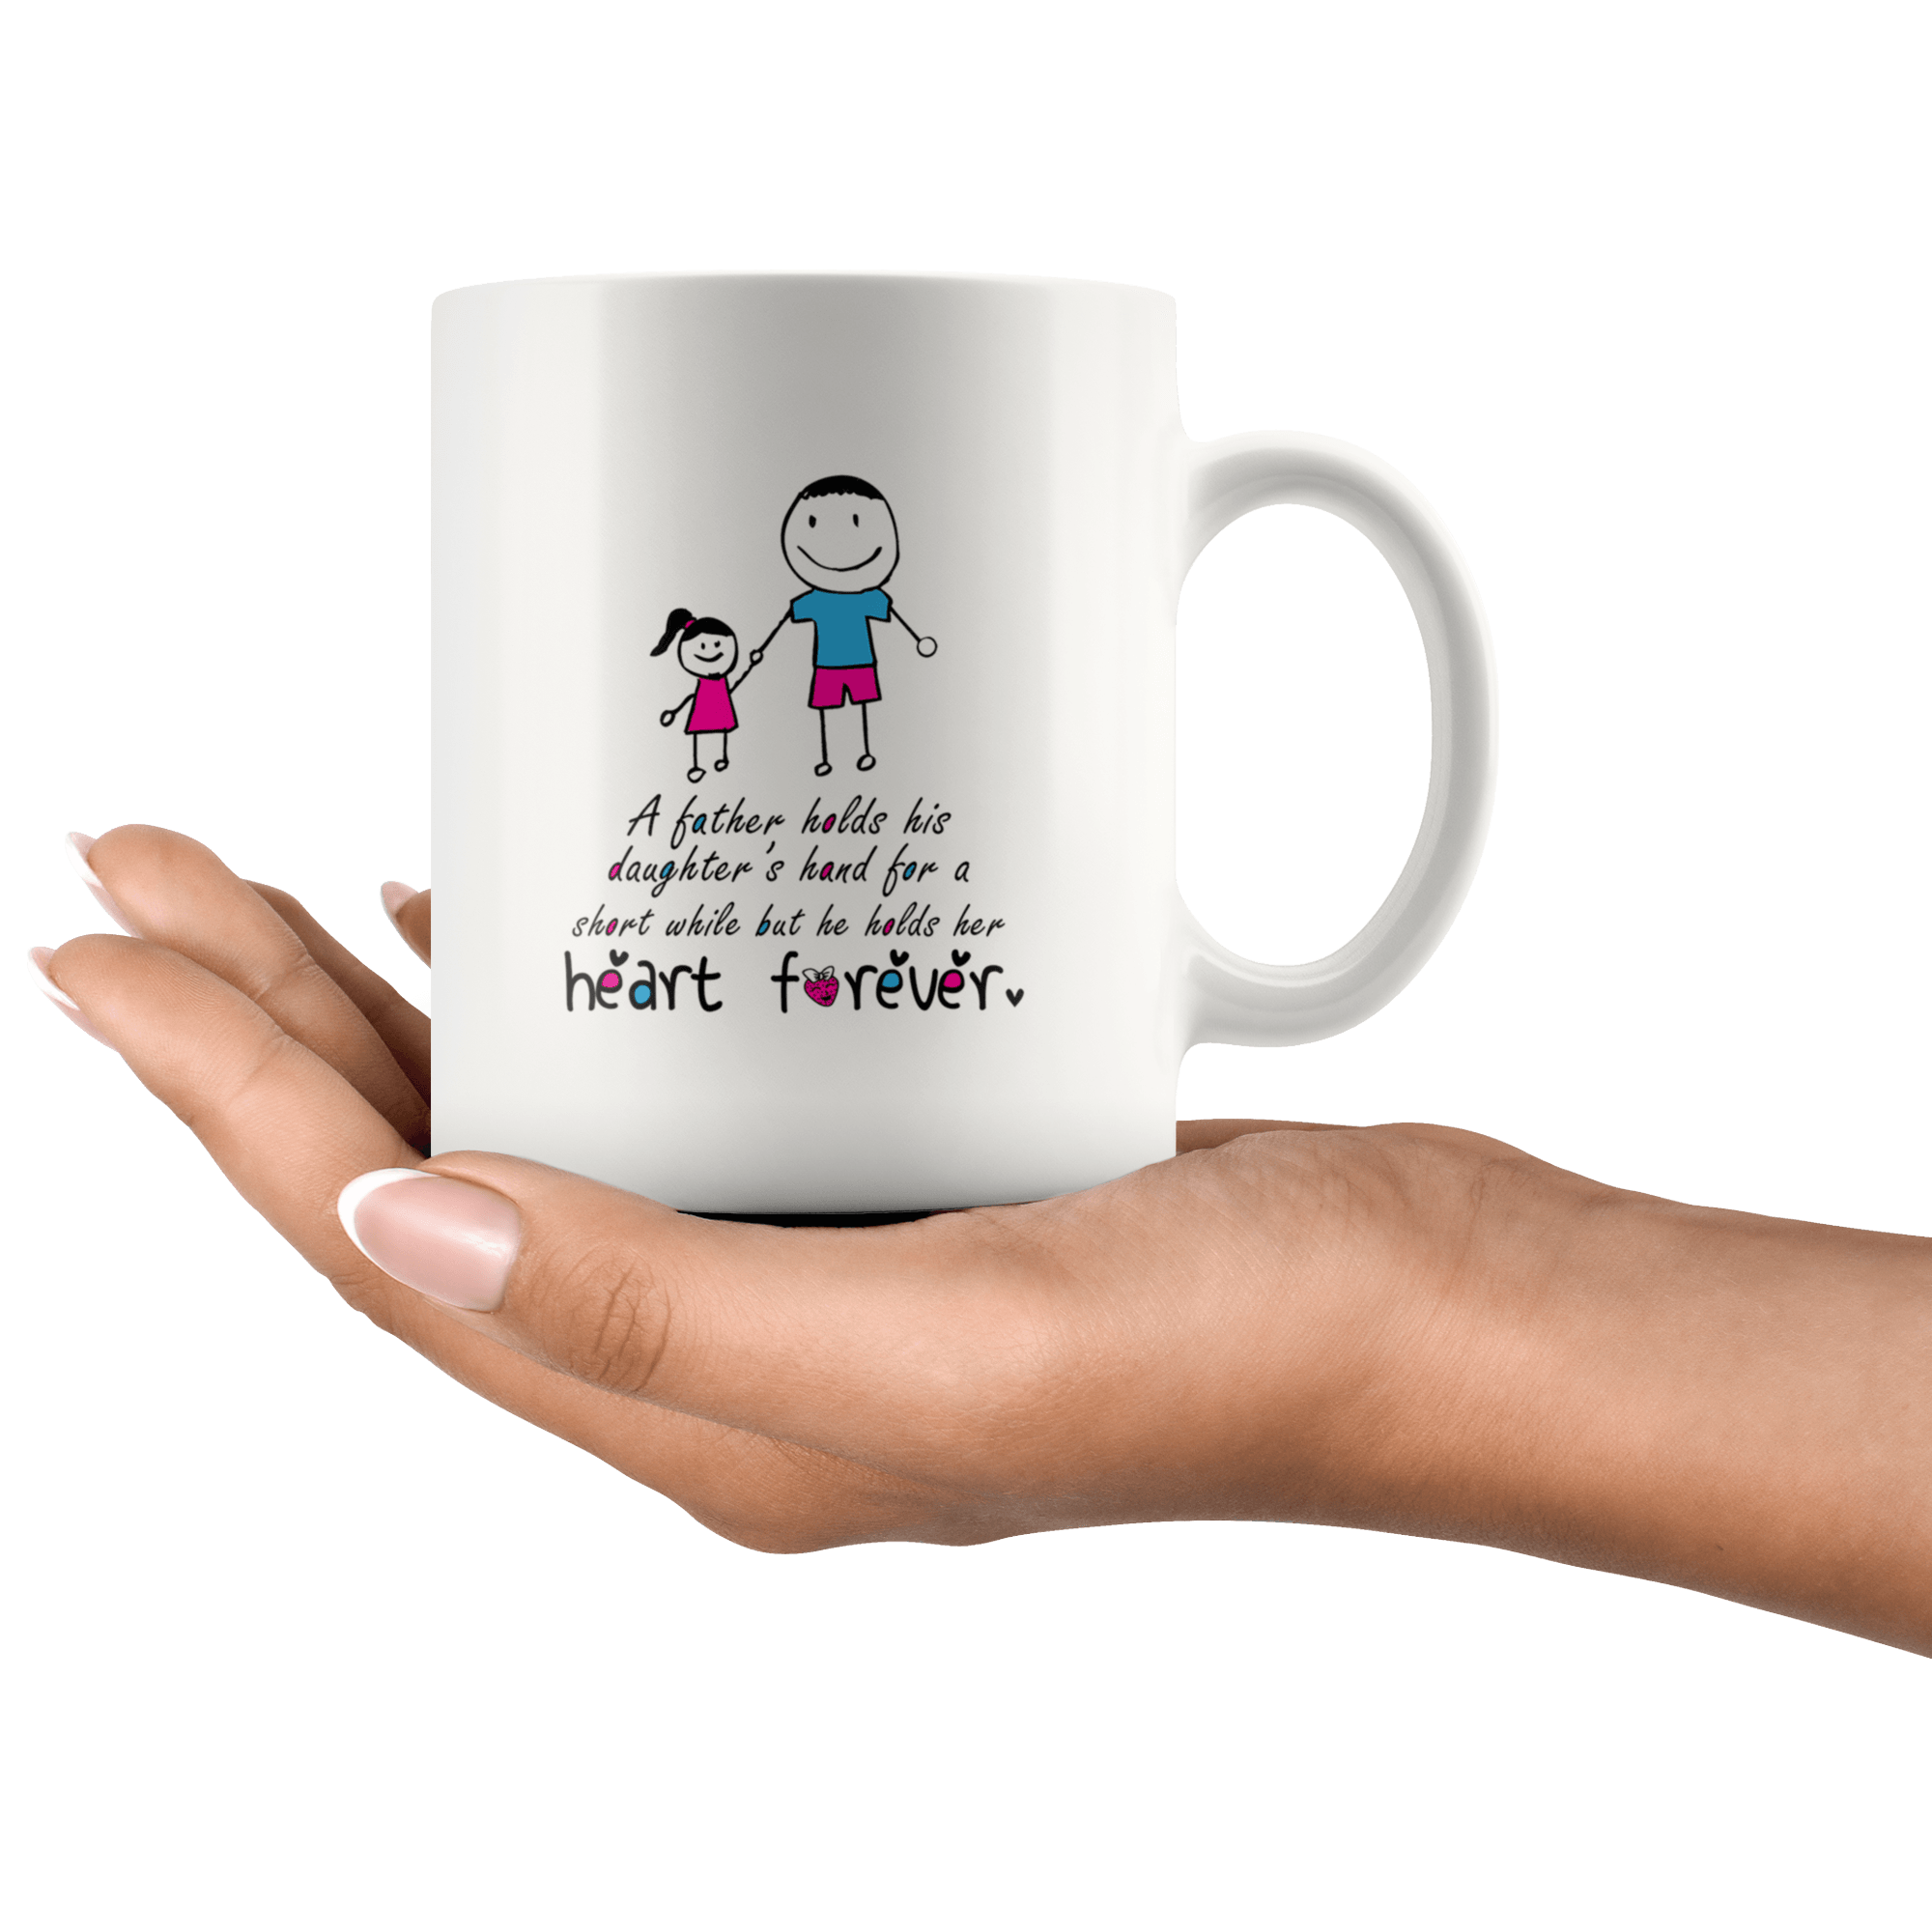 Great Coffee Mug For Father - A Father Holds His Daughter’s Hand For A Short While But He Holds Her Heart Forever - SPCM